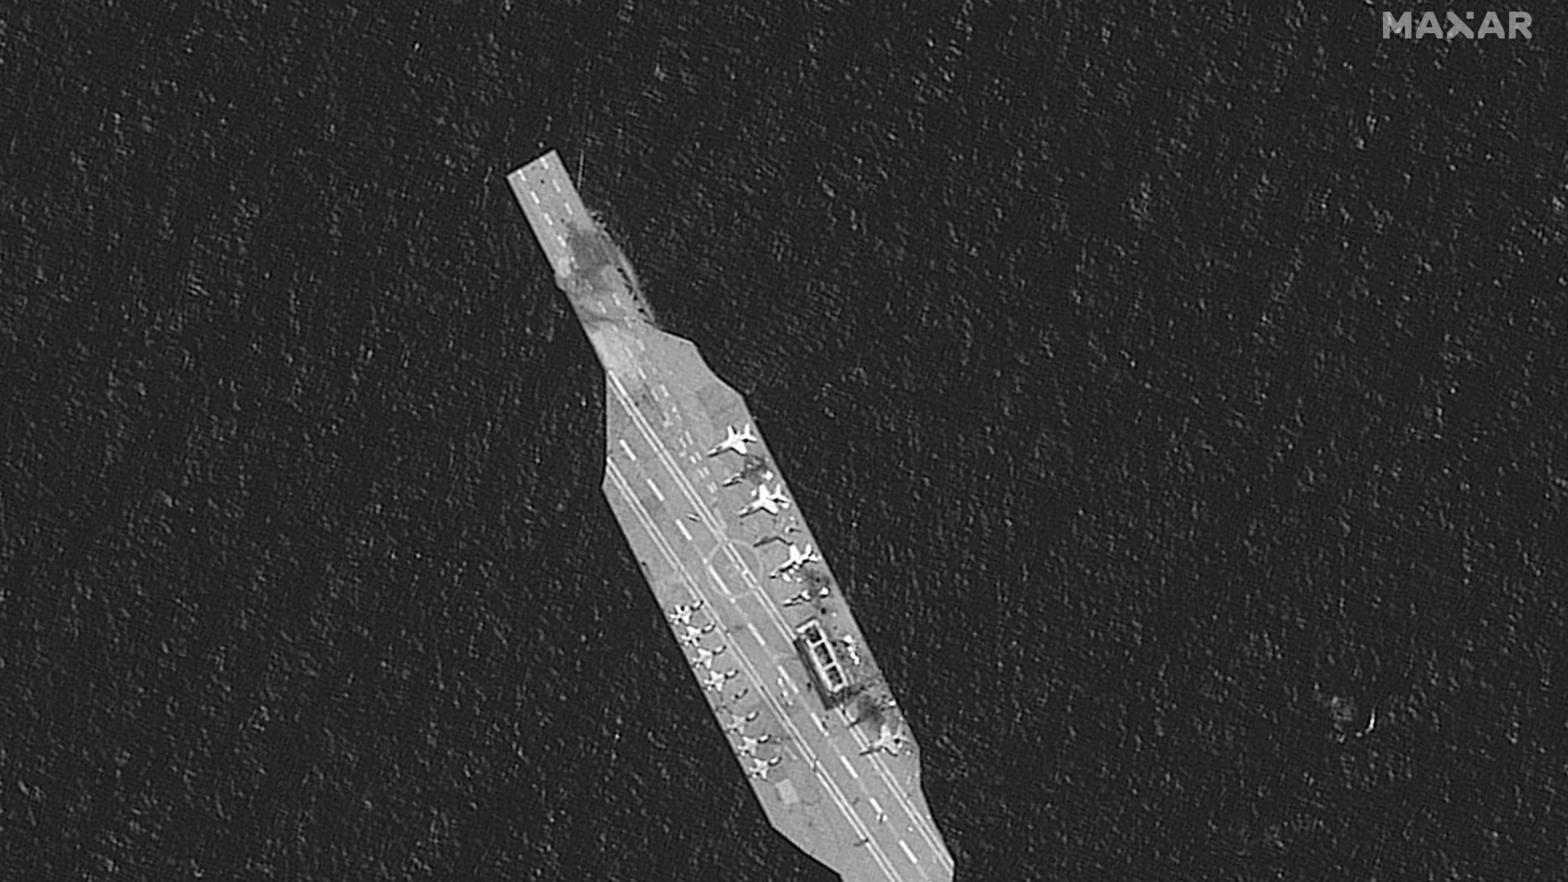 A satellite photo of an Iranian mock-up aircraft carrier damaged by IRGC live-fire exercises in the Strait of Hormuz on July 28, via Maxar Technologies. (Photo: Maxar Technologies, AP)